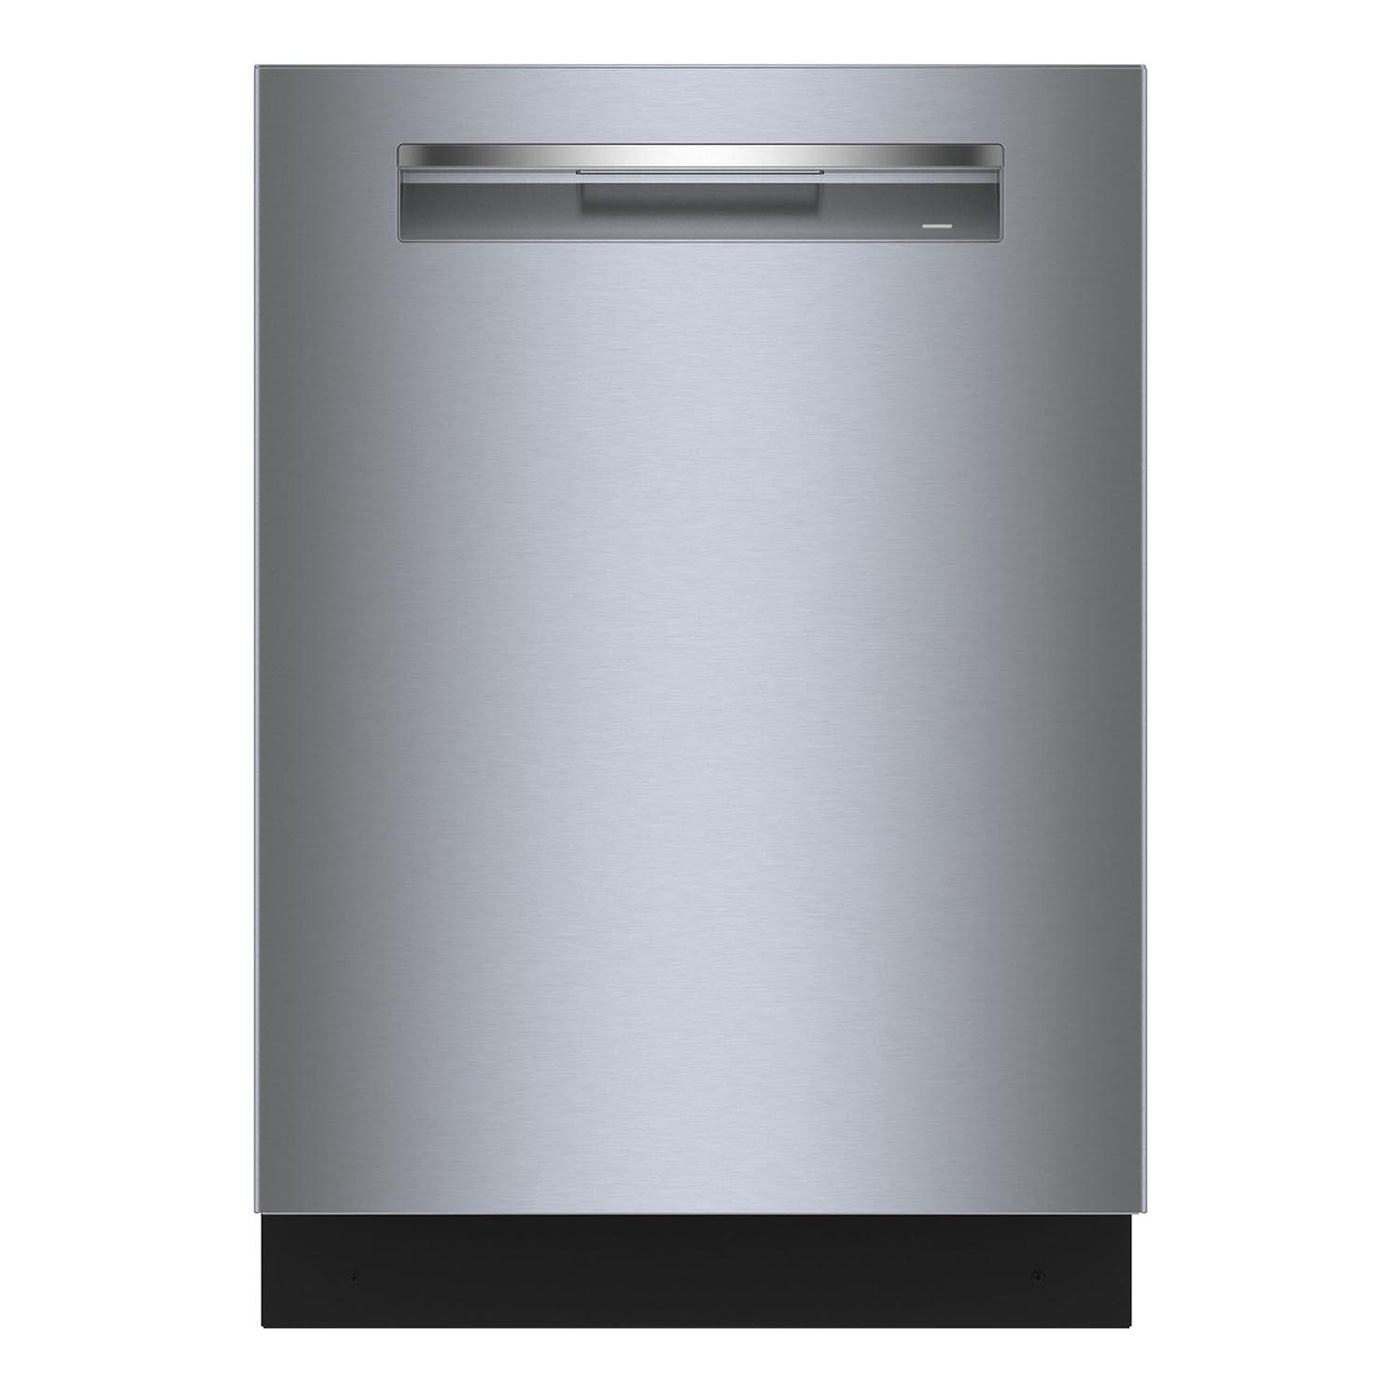 Bosch Stainless Steel 24" Smart Dishwasher with Home Connect, Third Rack - SHP65CM5N